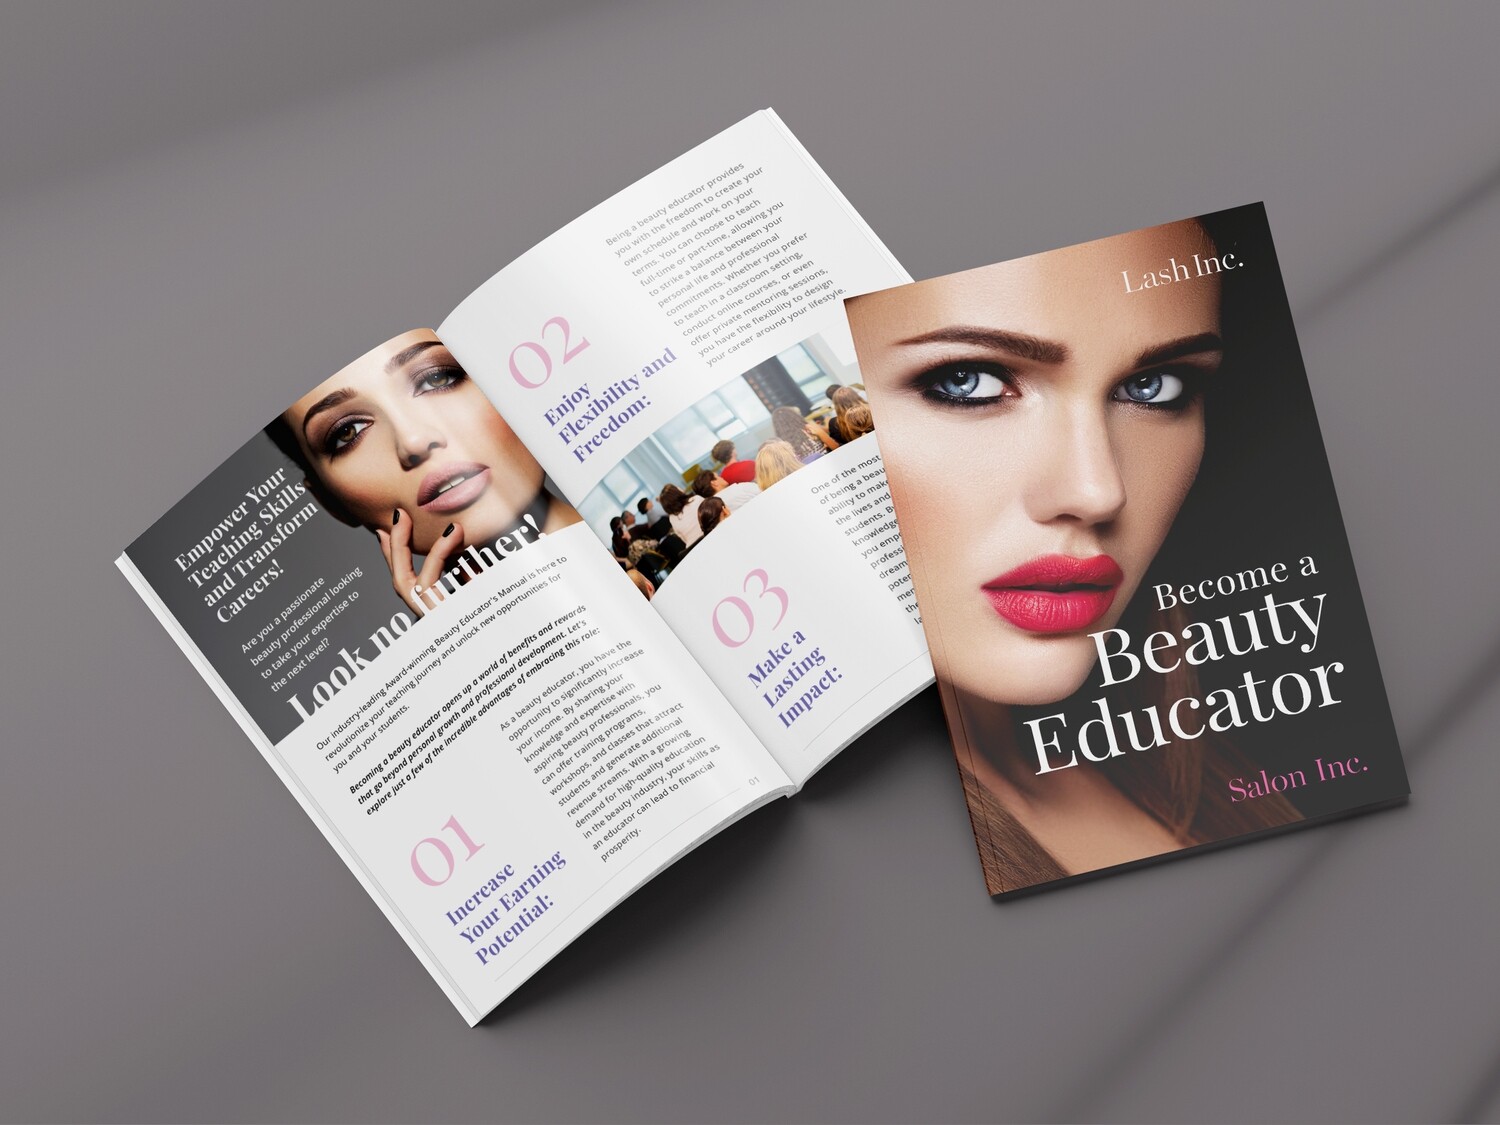 Become a Beauty Educator - Intro Booklet